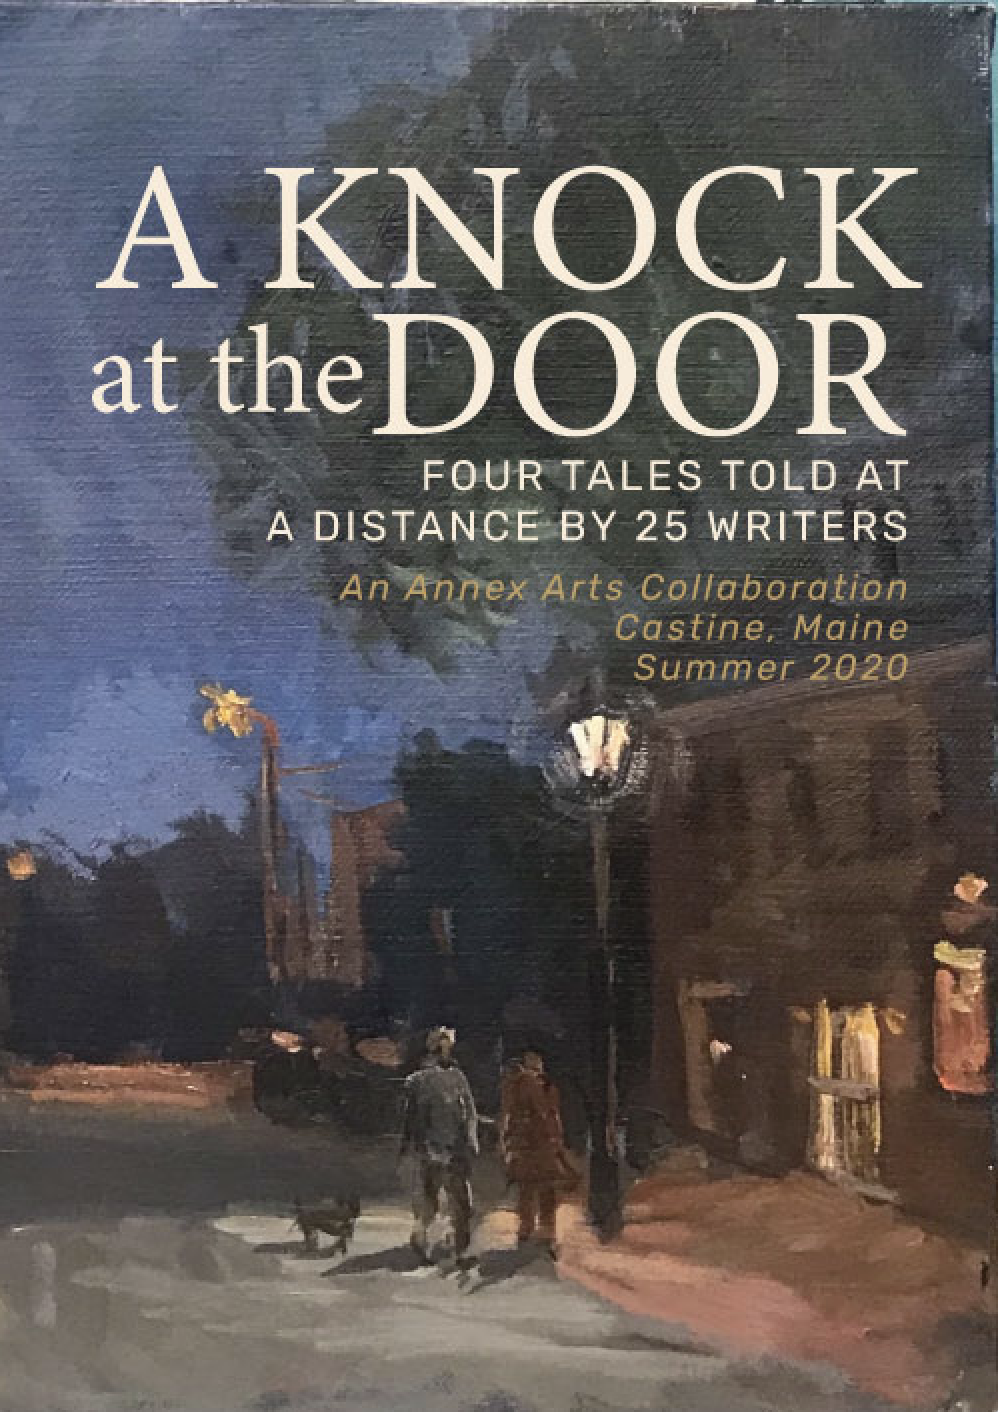 Book Launch: "A Knock at the Door"